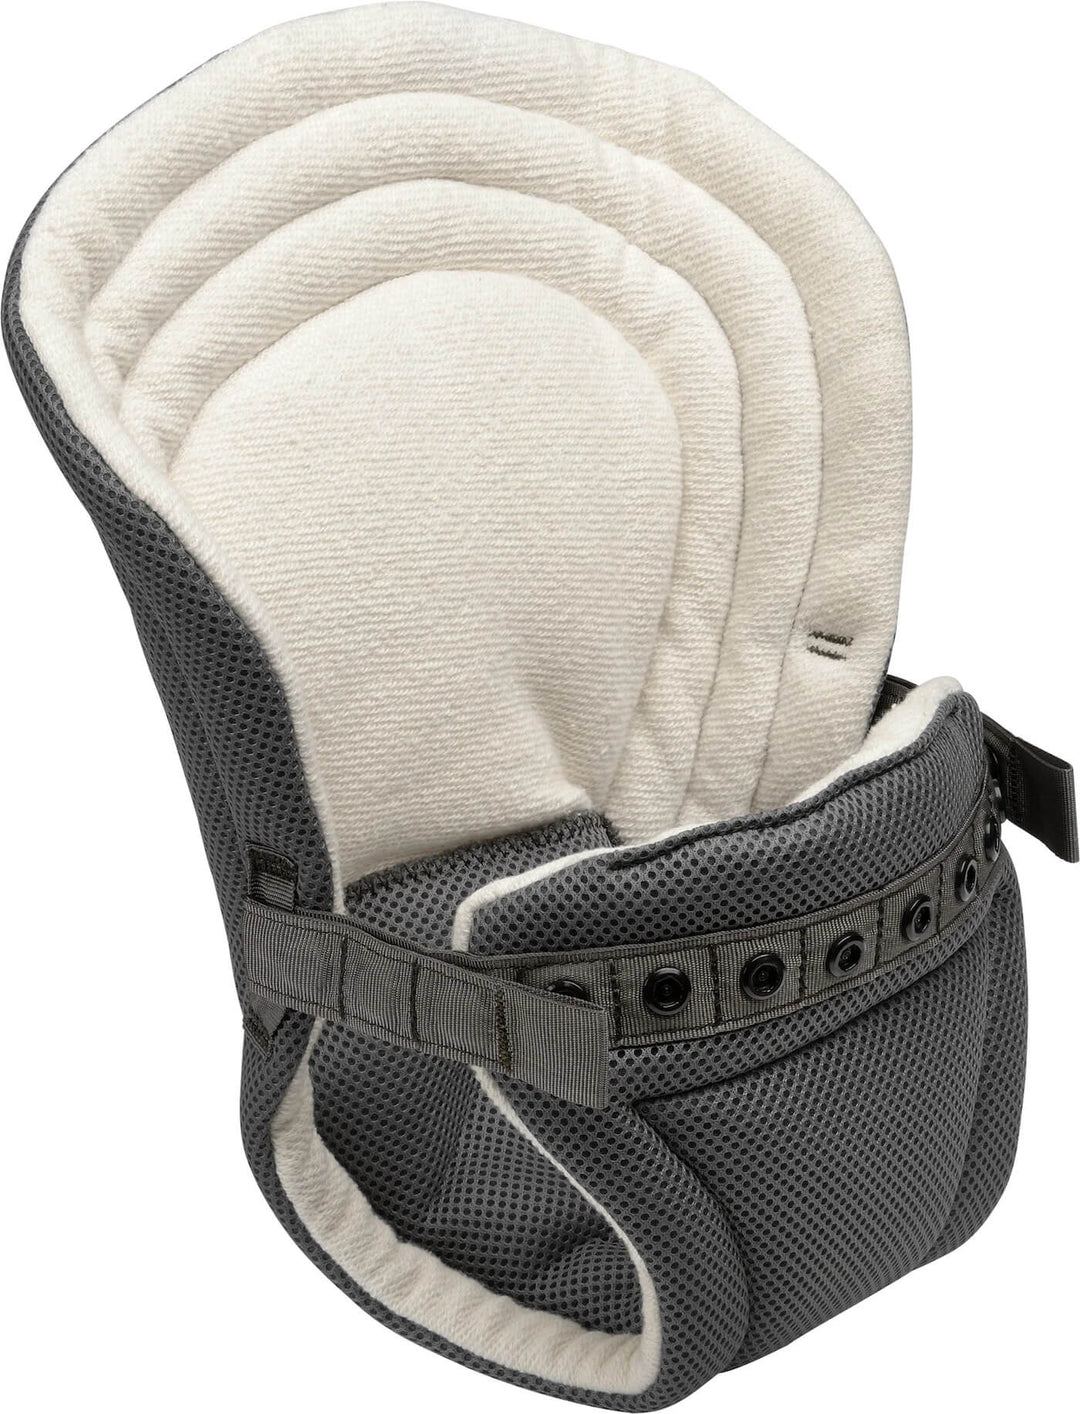 Slate Colored Baby Booster Infant Insert by Onya Baby